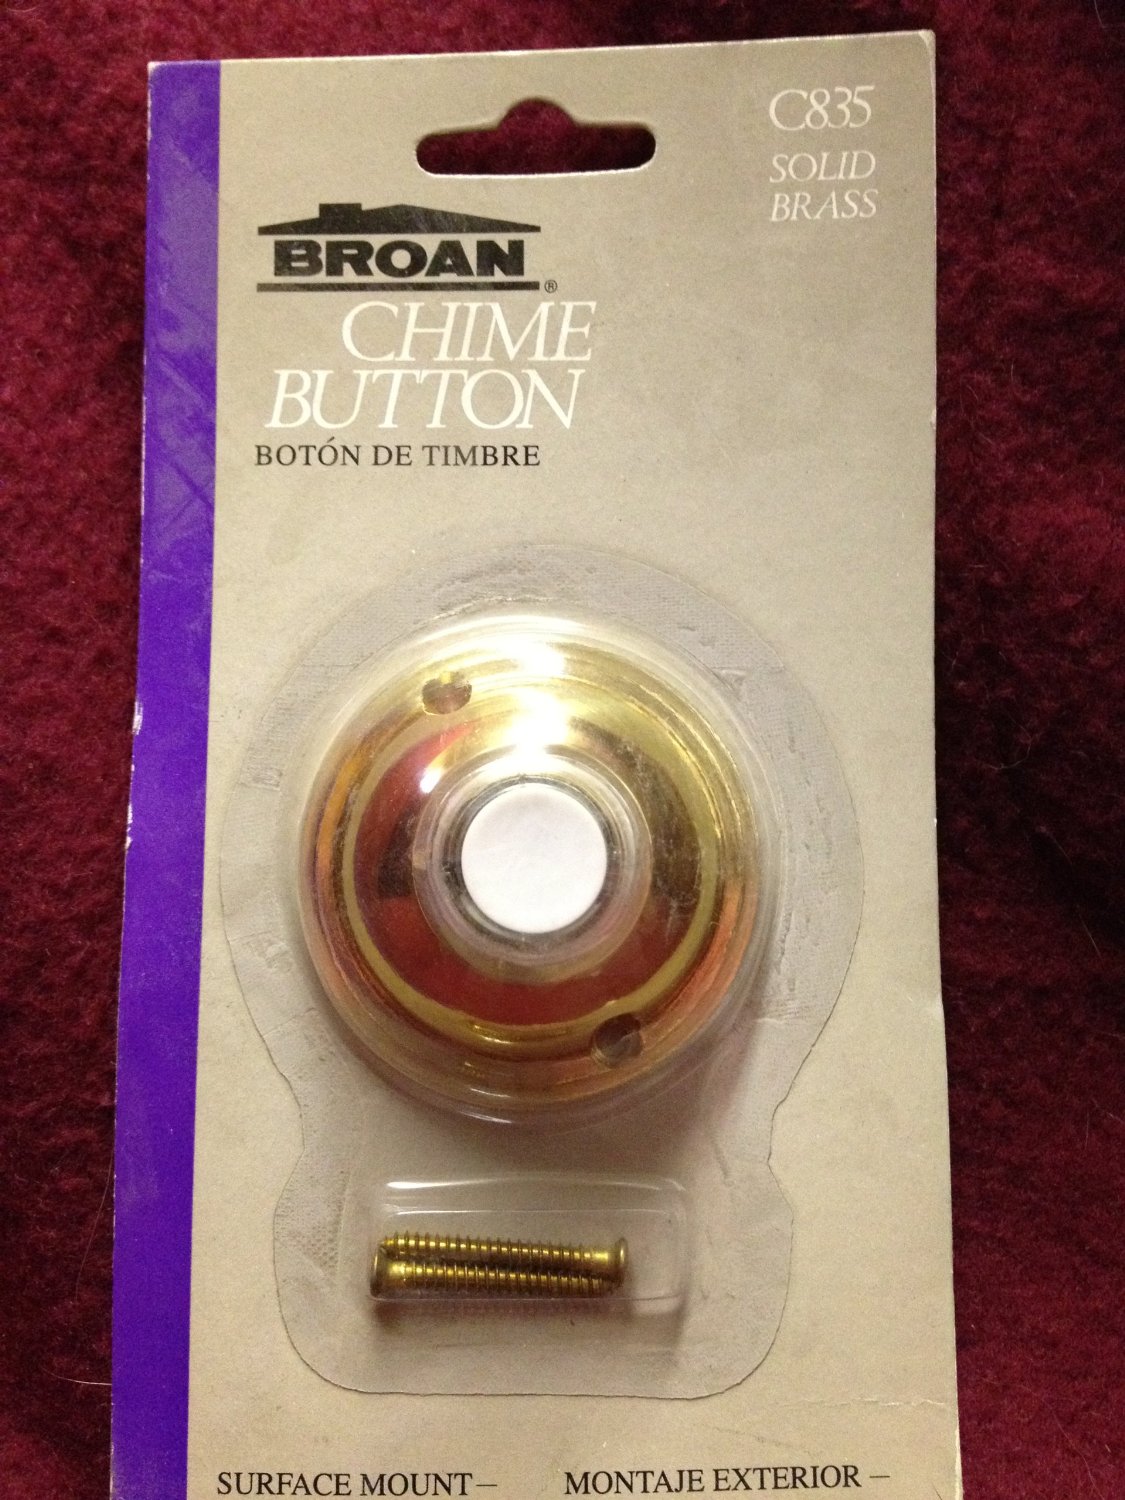 Broan Chime Button Solid Brass C835